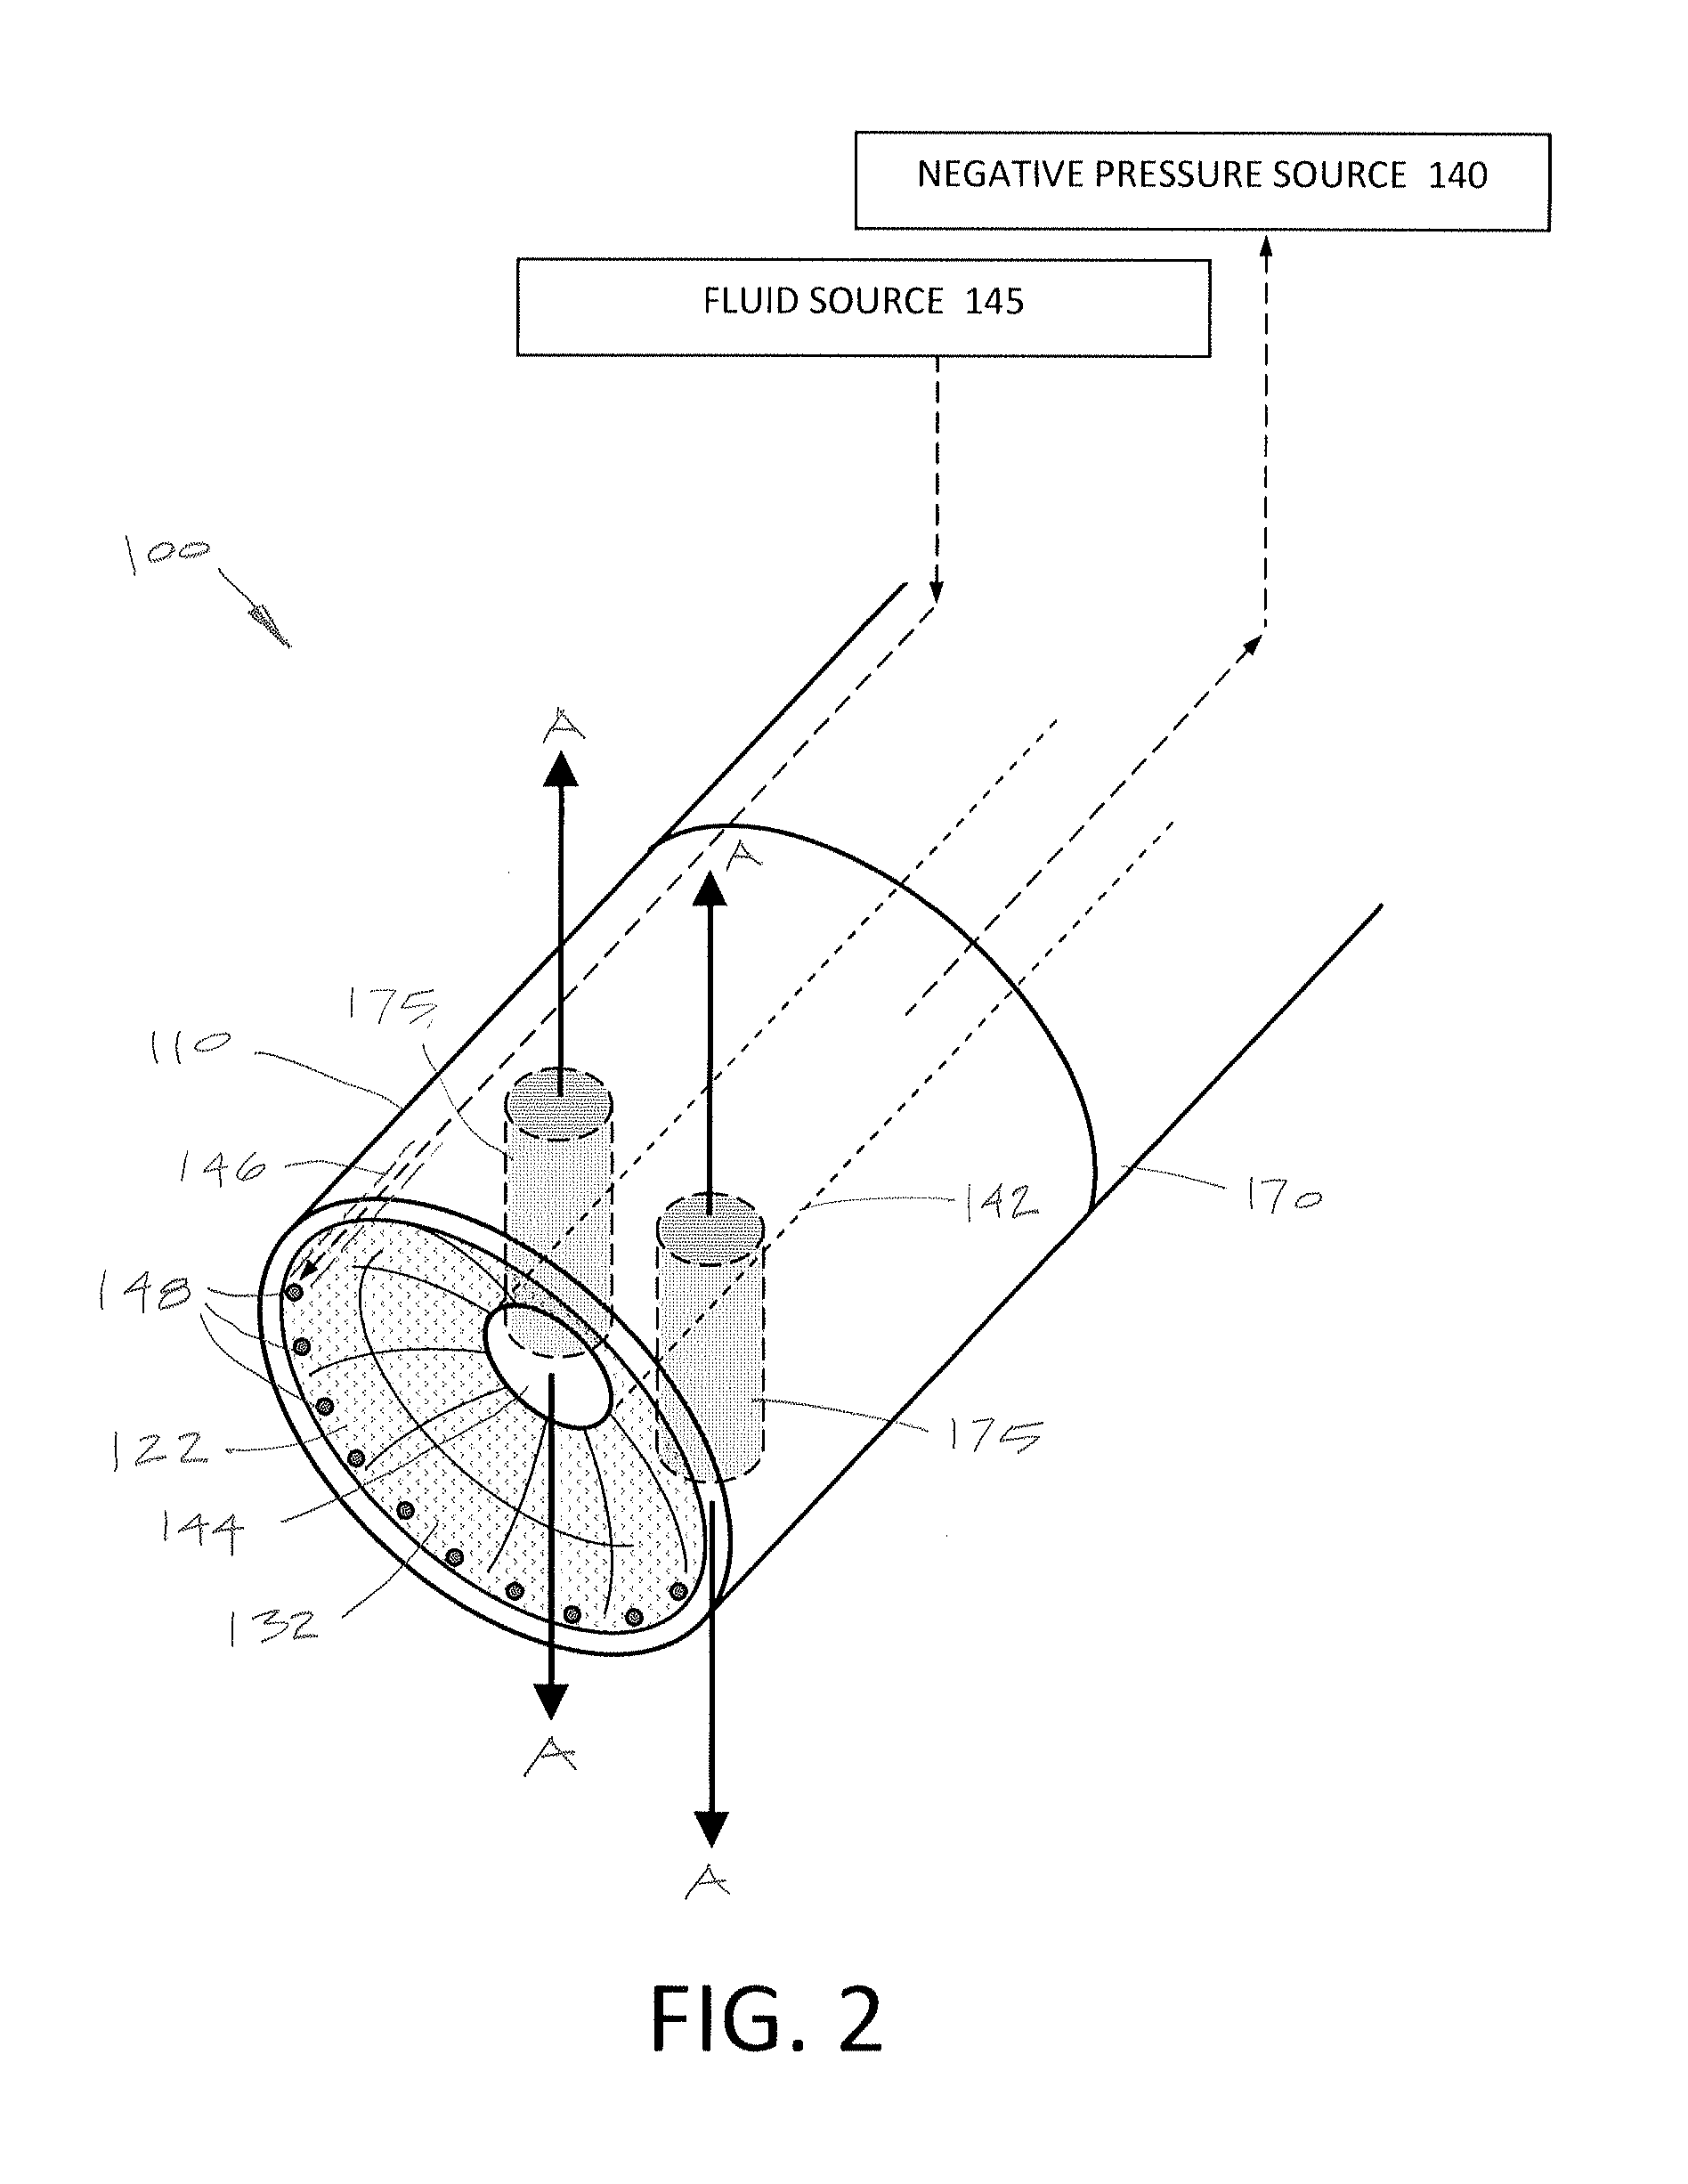 Fluid skin treatment systems and methods